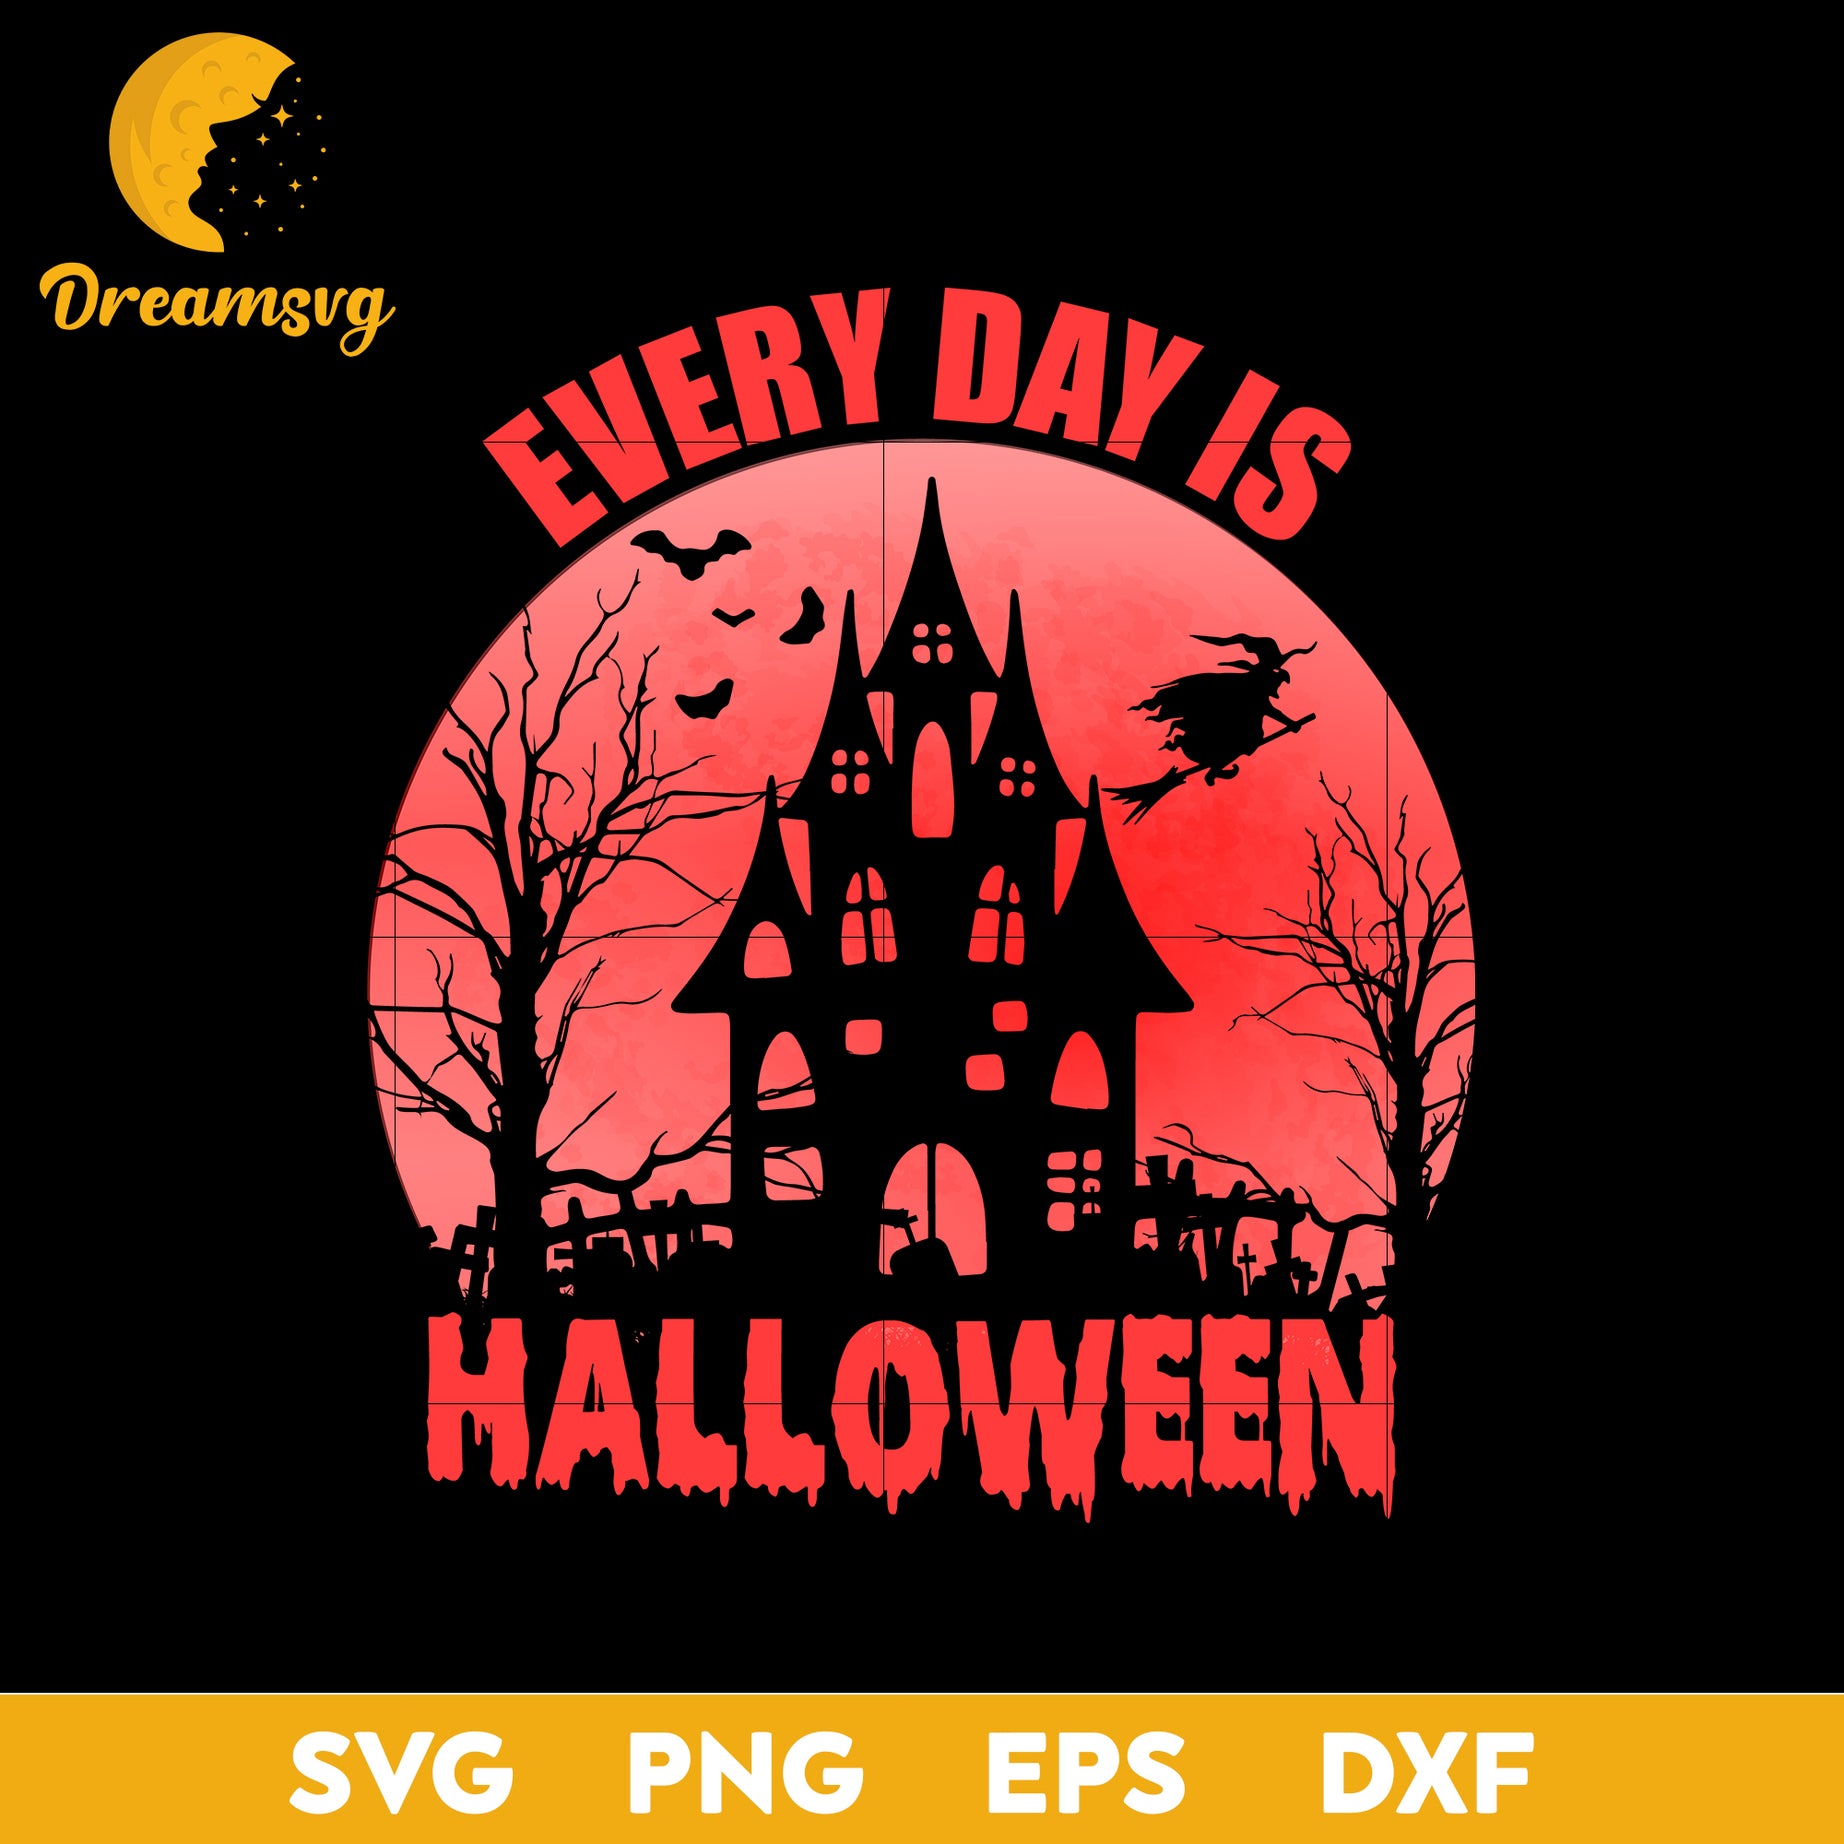 Every day is halloween svg, Halloween svg, png, dxf, eps digital file.